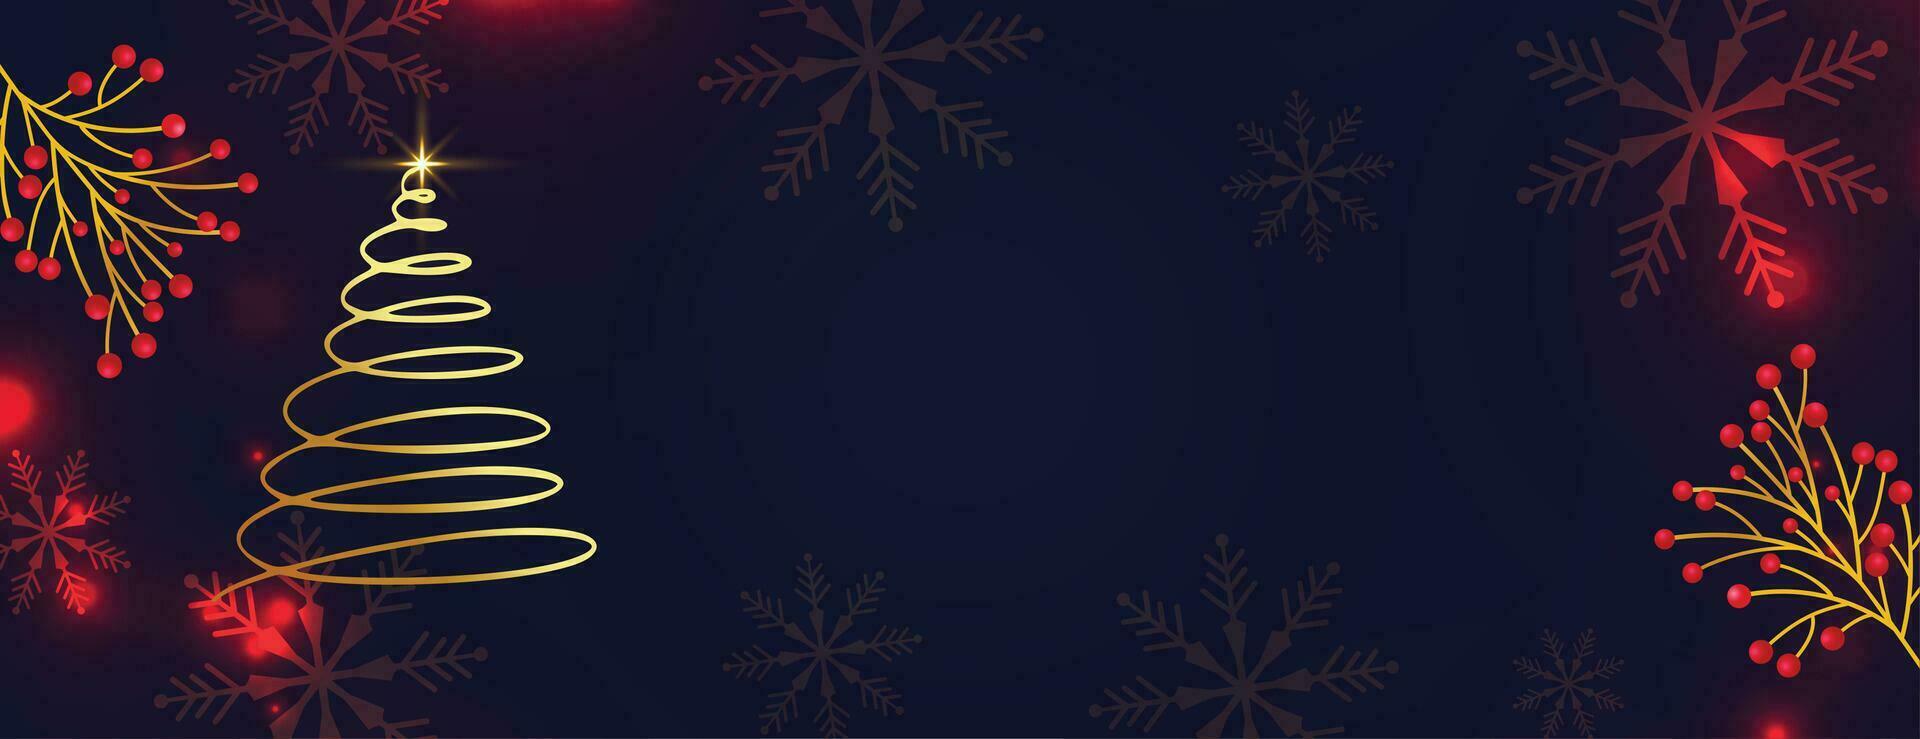 merry christmas banner with abstract xmas tree and holly berry vector